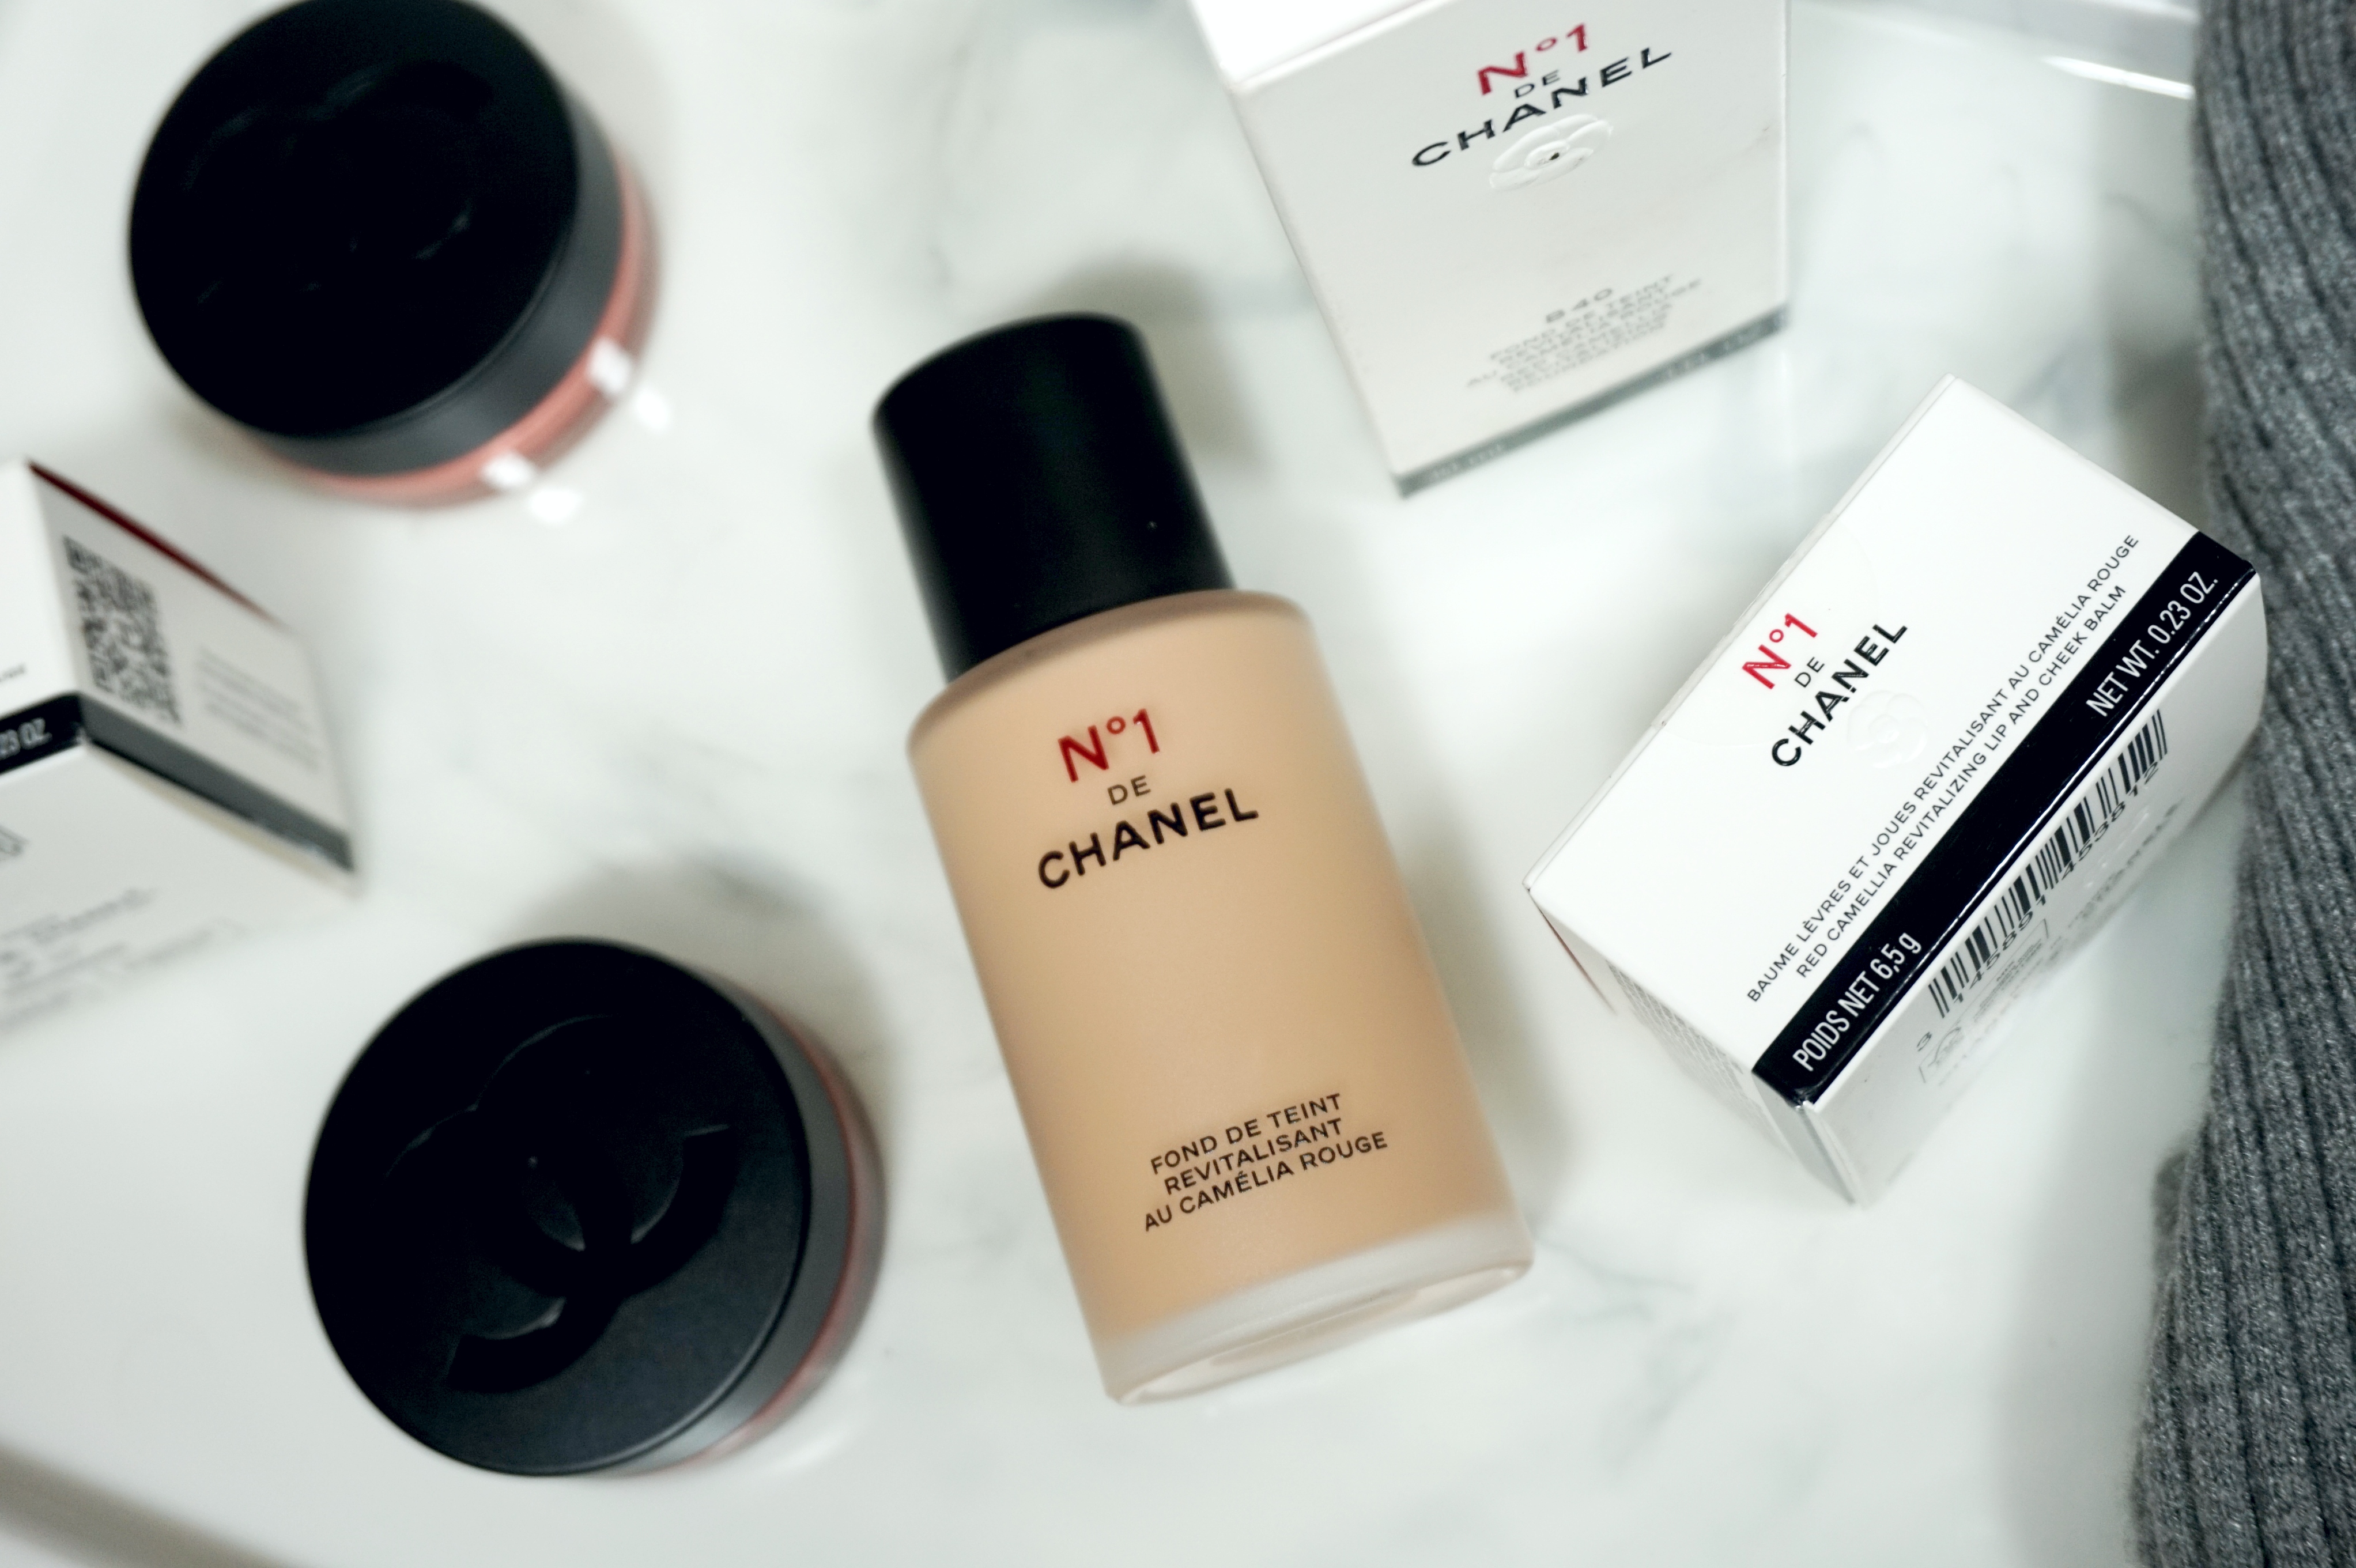 Chanel N°1 DE CHANEL Red Camellia Revitalizing Foundation Review and Swatches